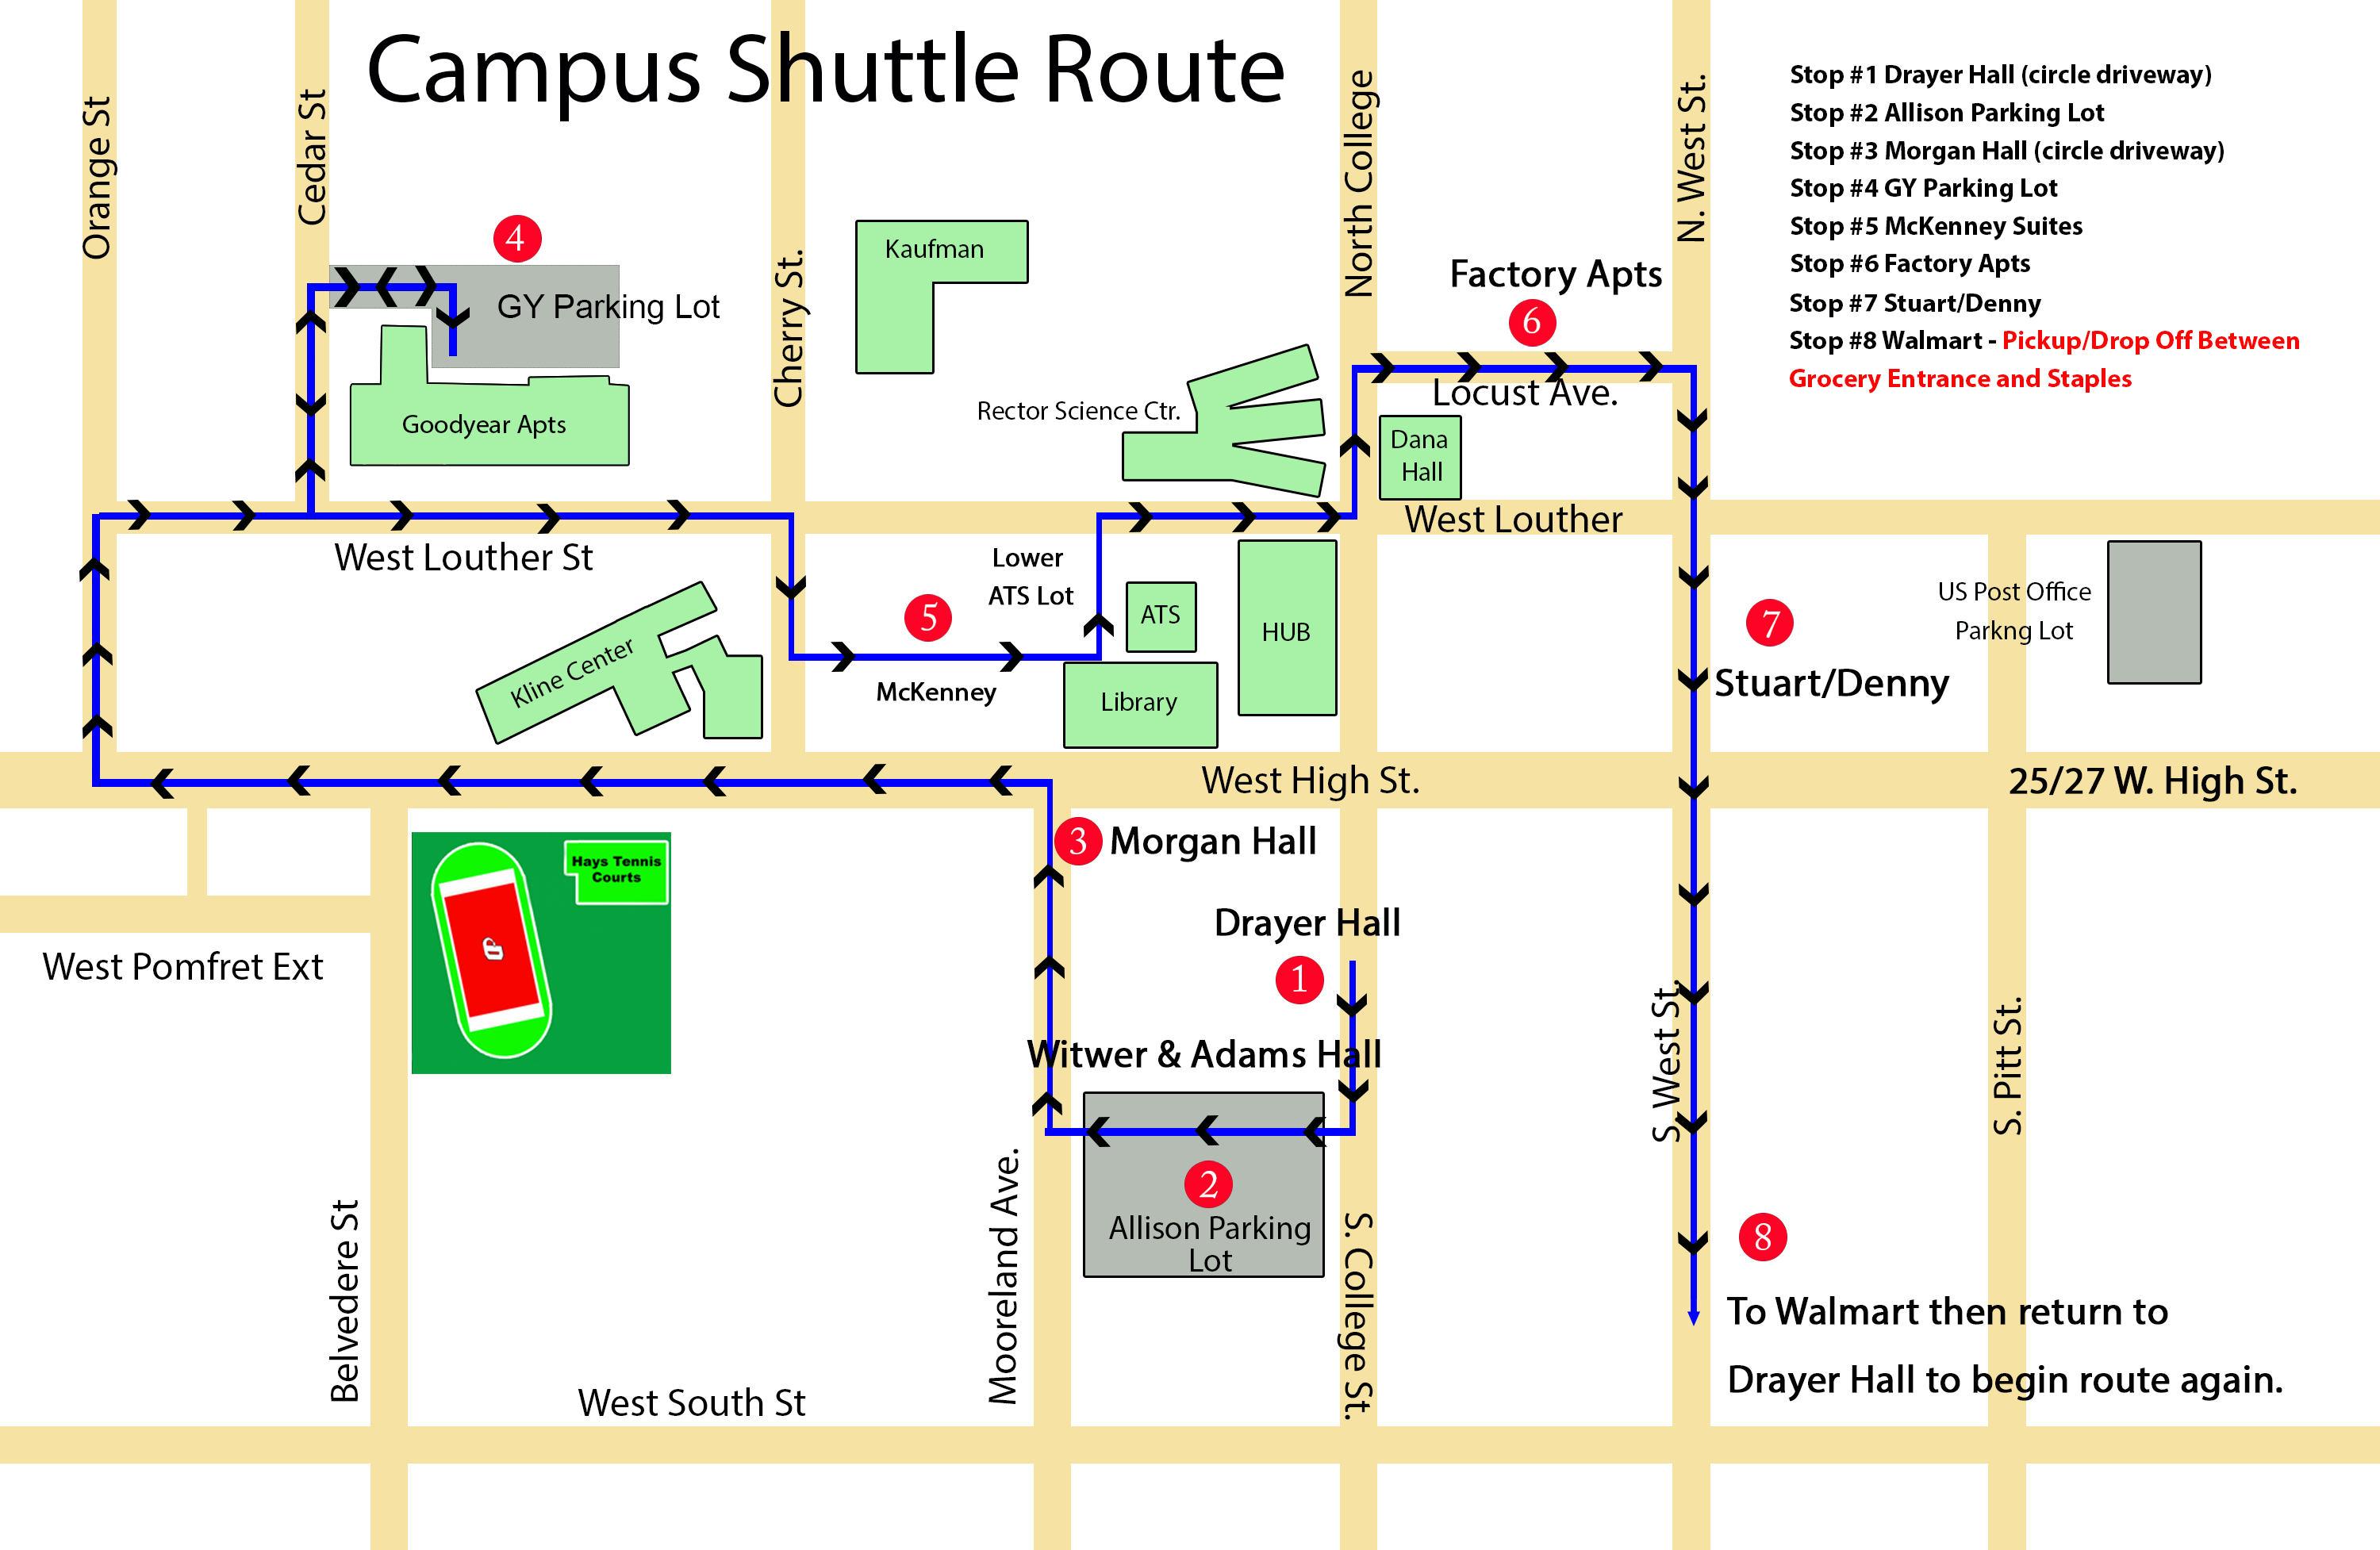 Campus Shuttle map